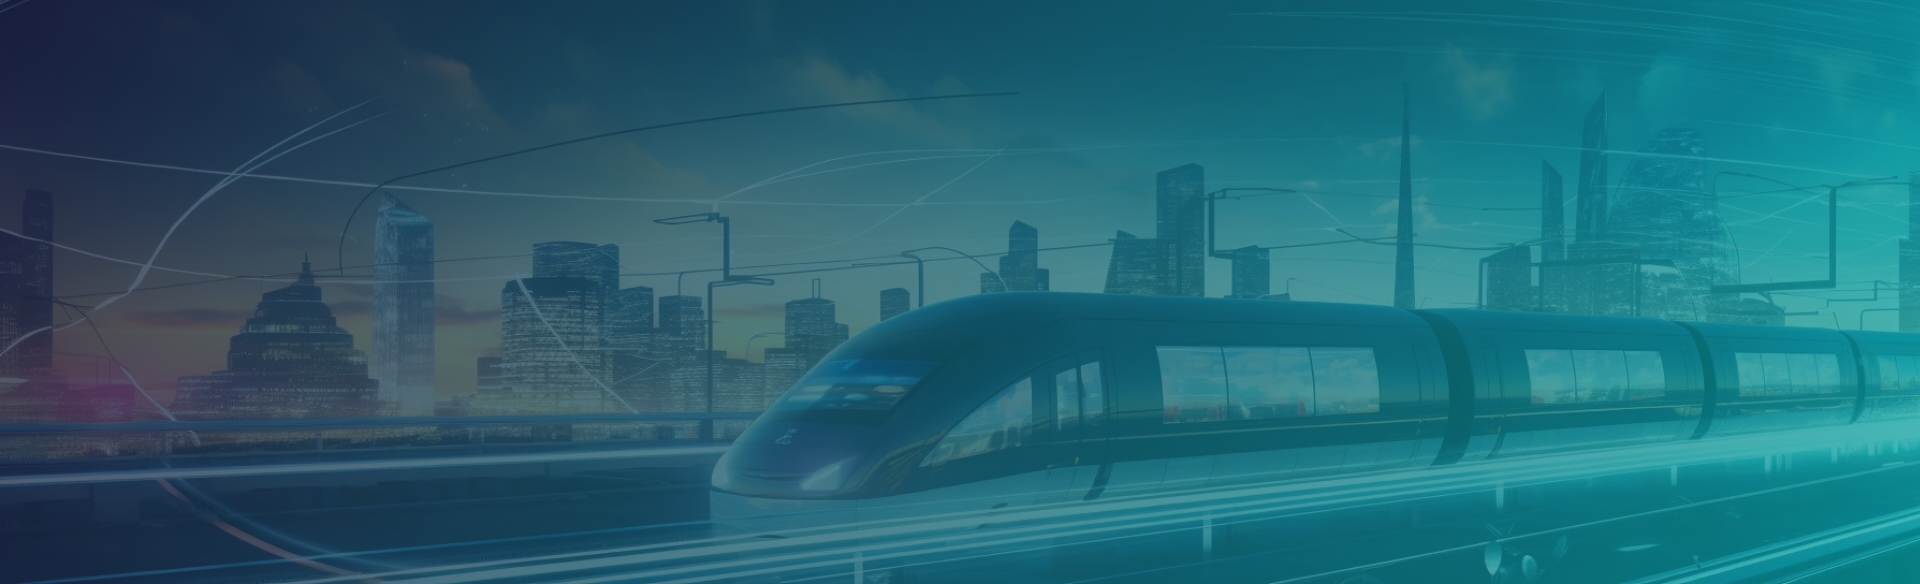 Infrastructure theme with futuristic train and city skyline at dusk